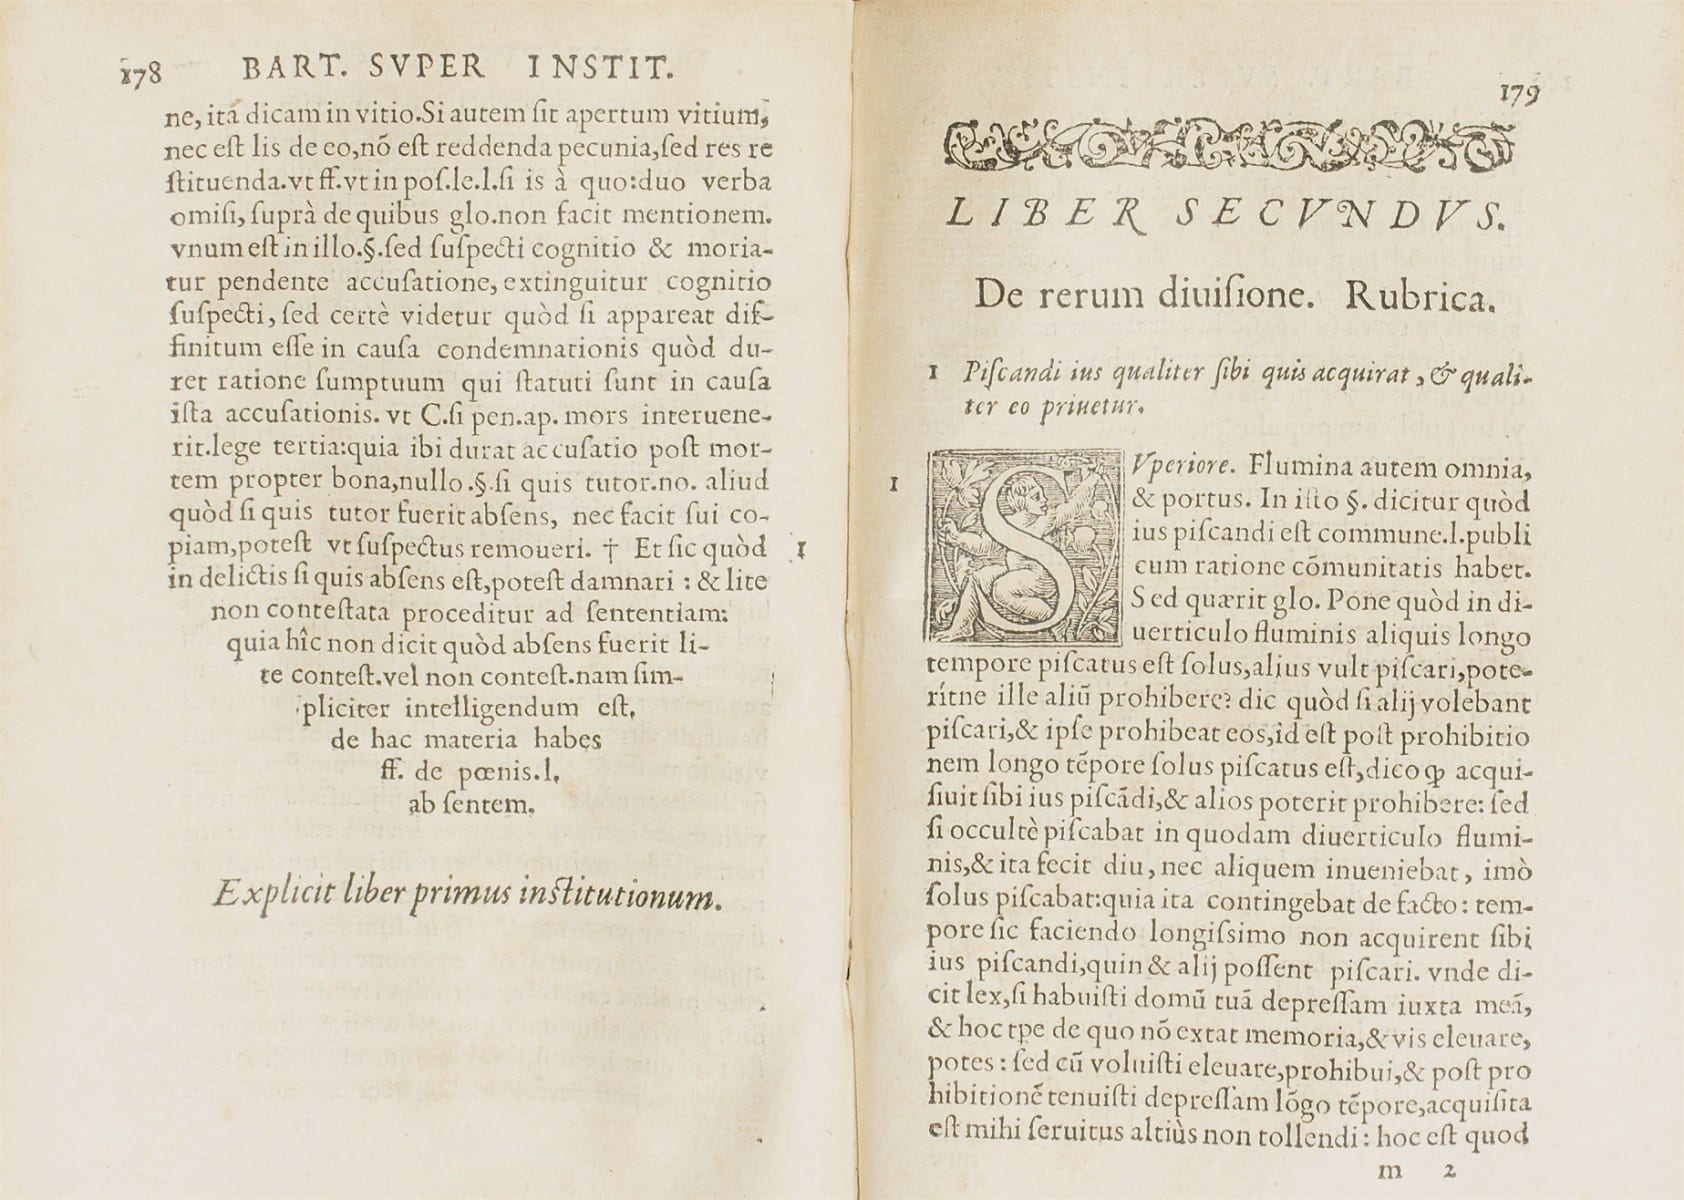 Two-page book spread with latin text and embellished letters. Links to larger version of this image.